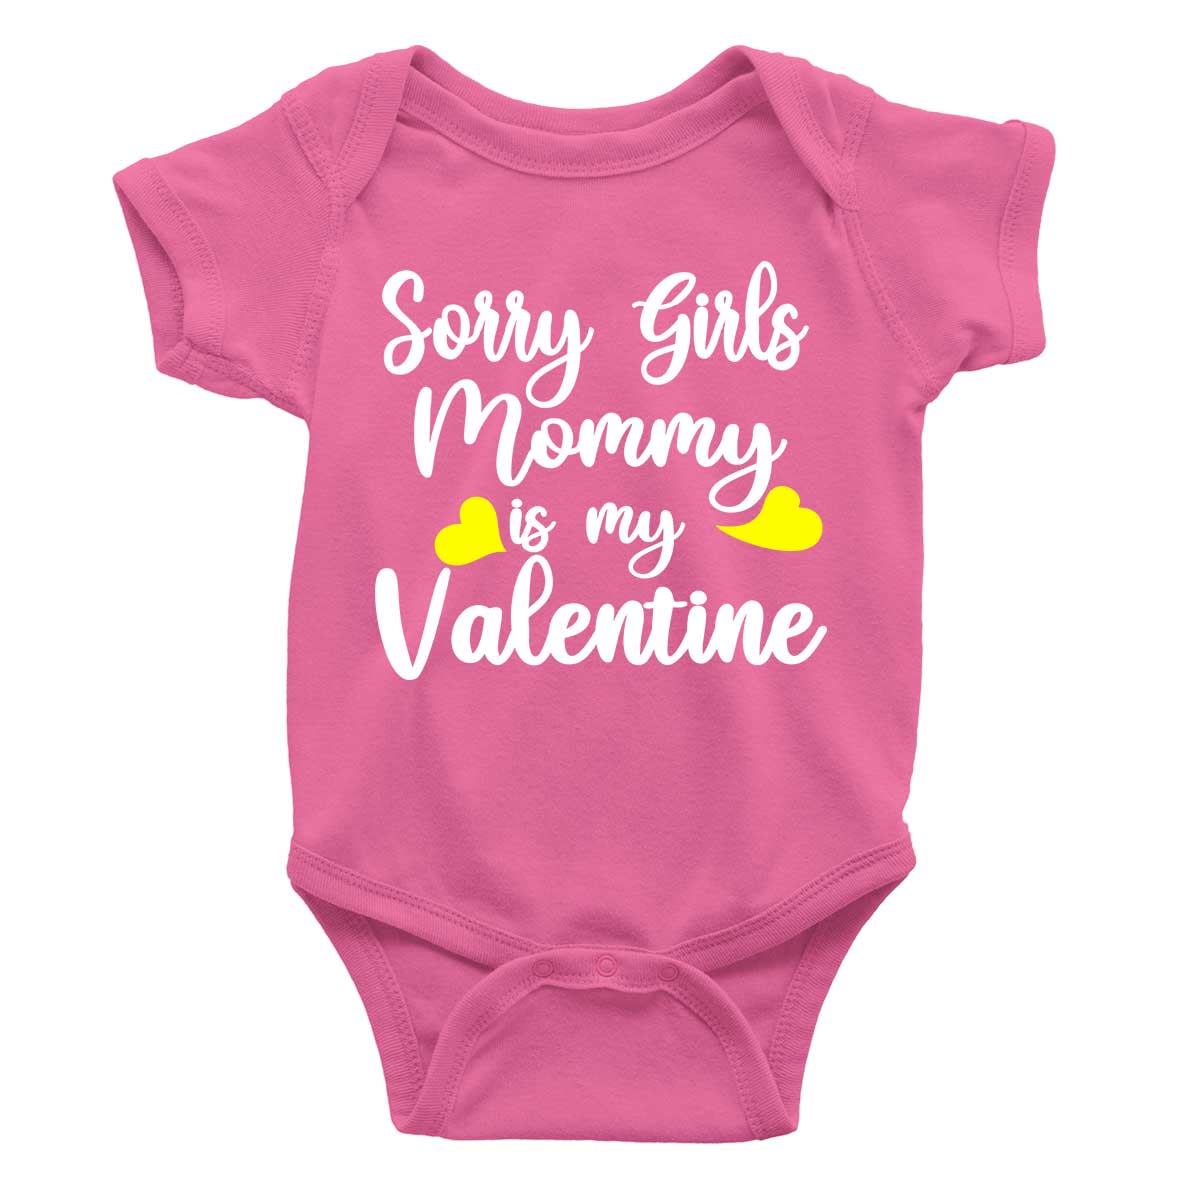 jopo sorry girls mommy is my valentine Pink